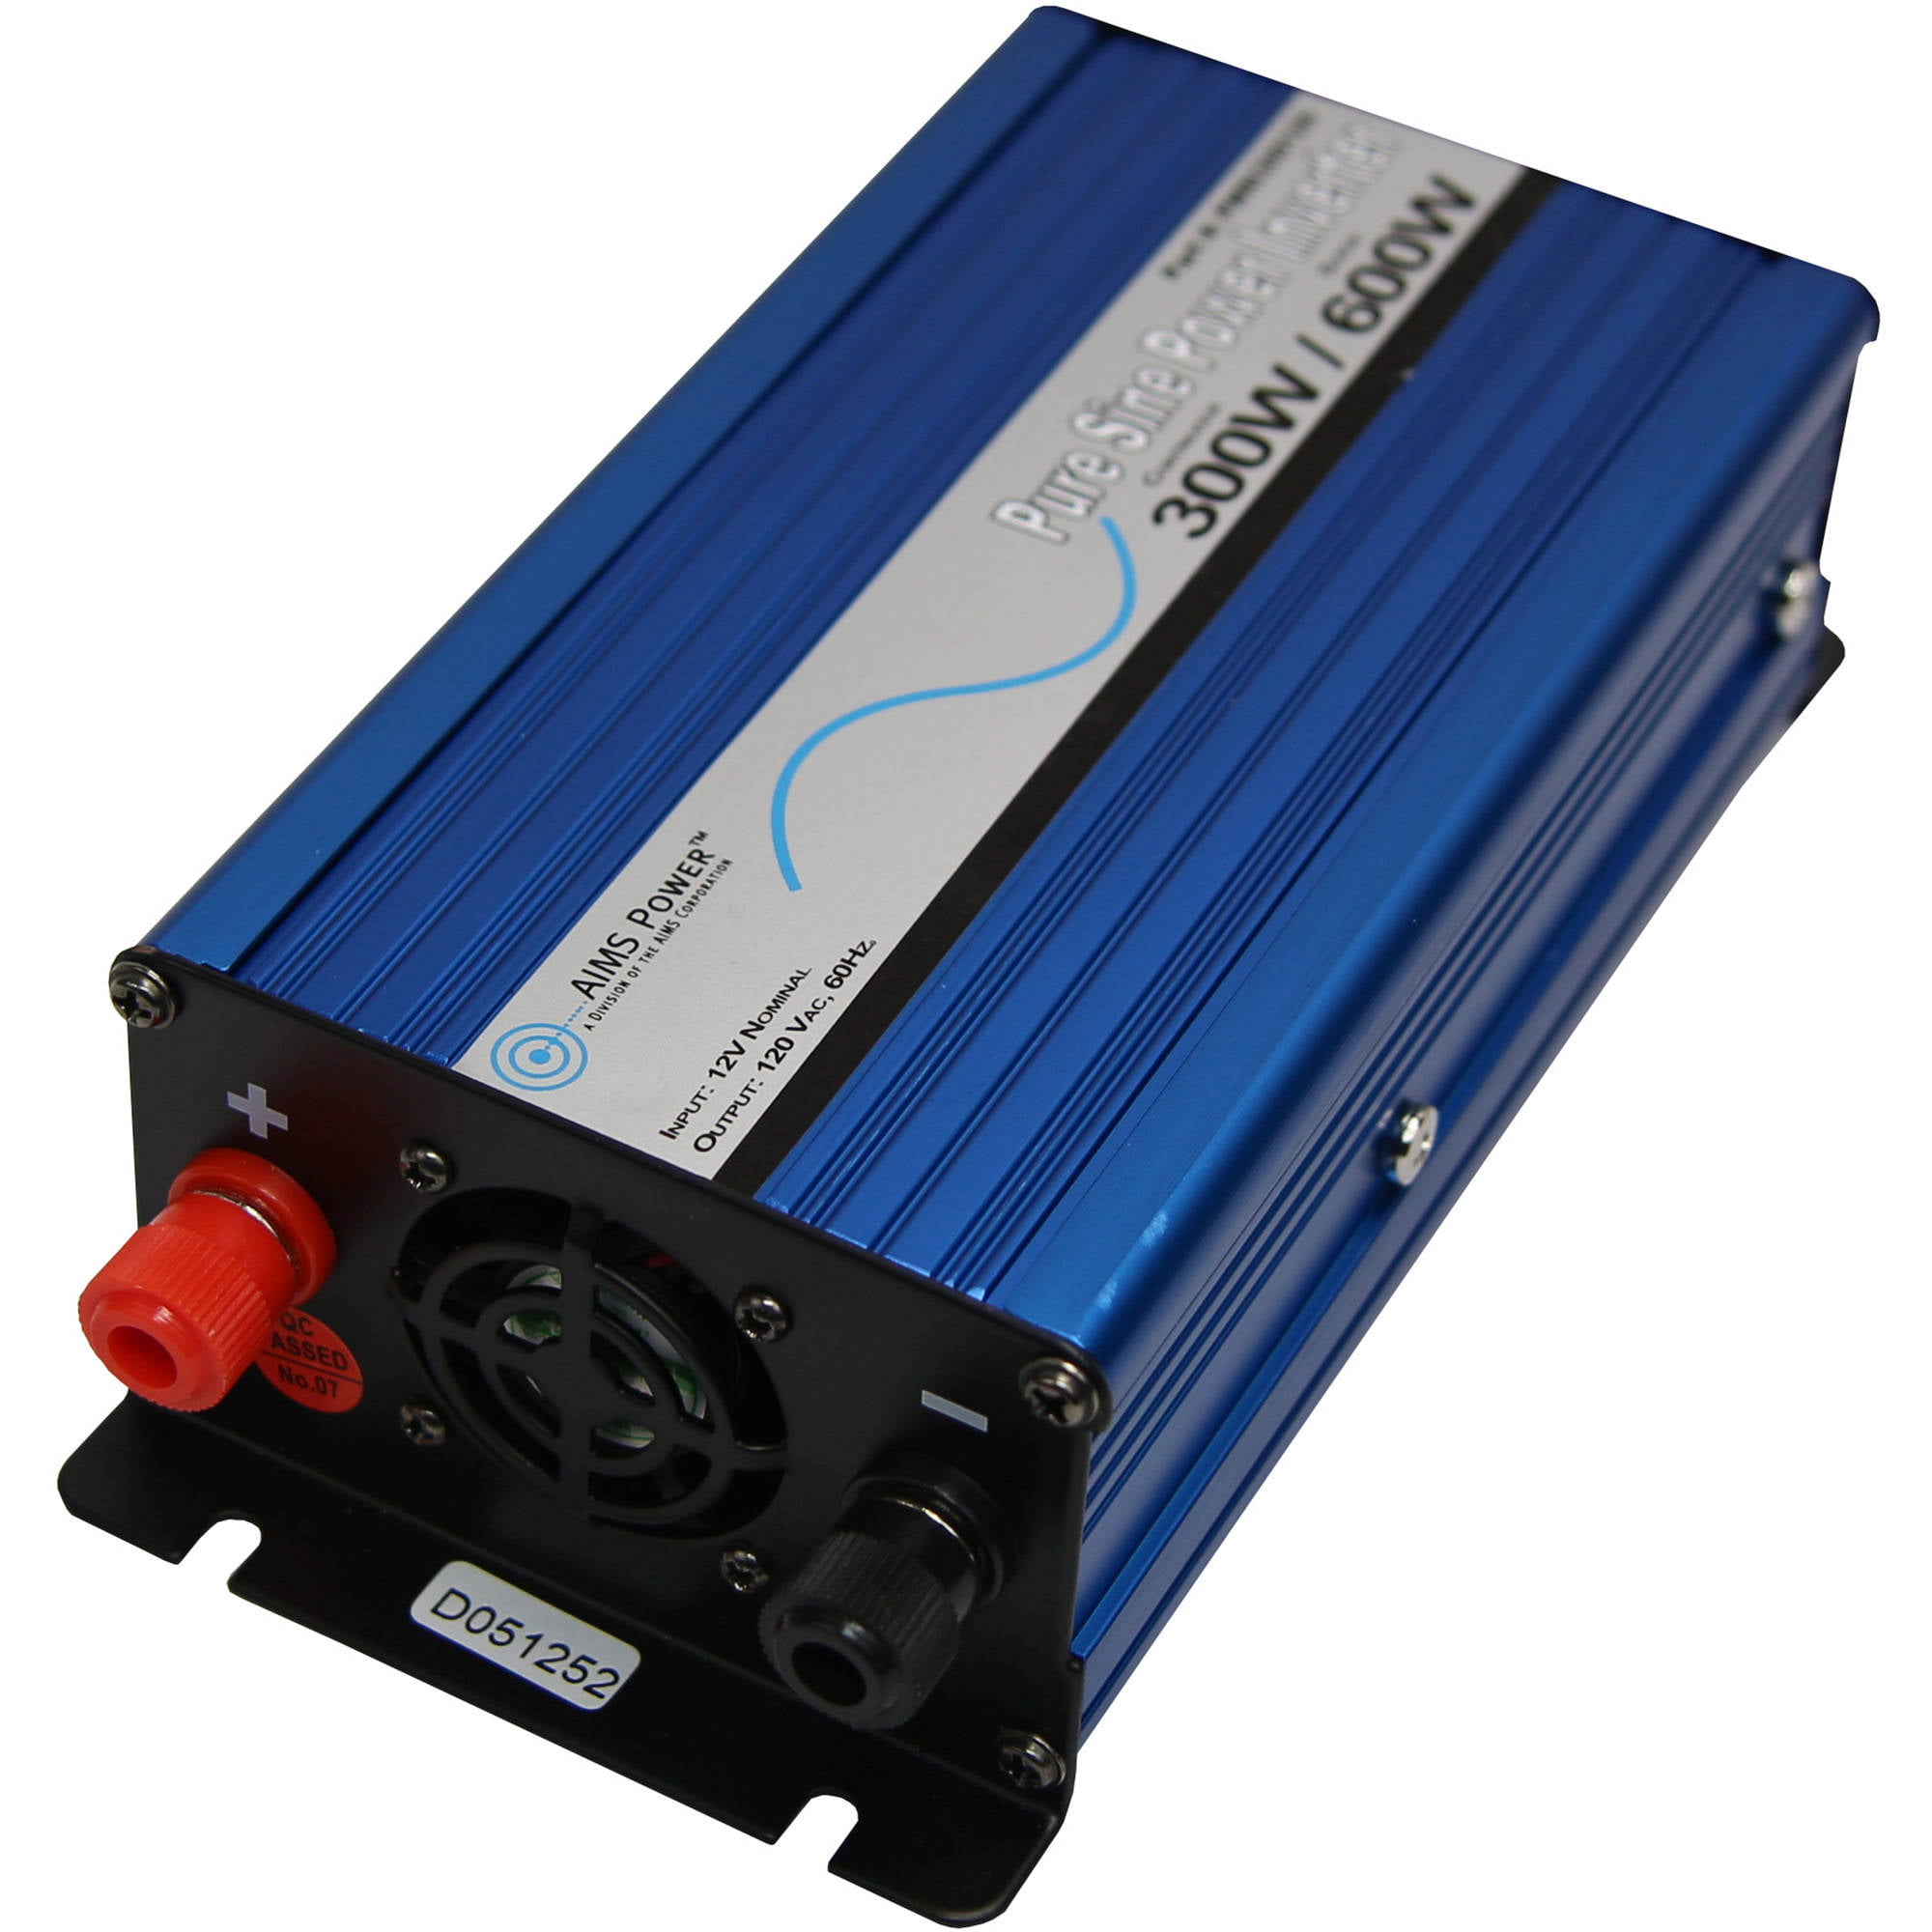 AIMS Power  300 Watt 12  Volt  Pure Sine Inverter  with Cables 